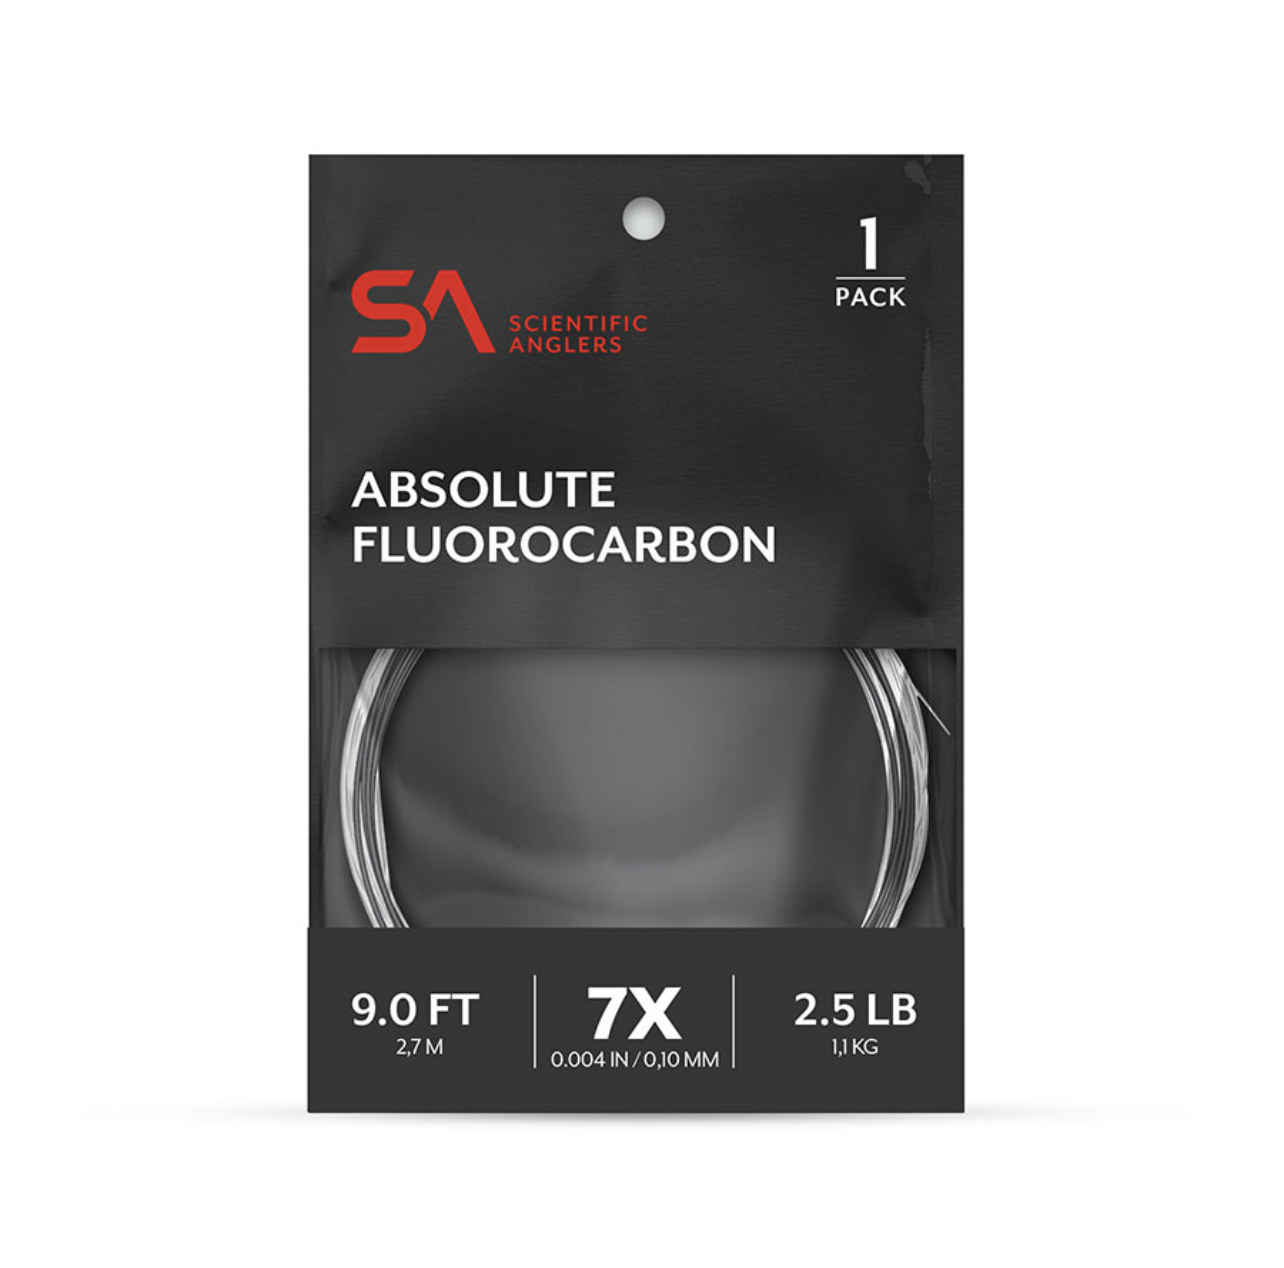 Scientific Anglers Absolute Fluorocarbon Leader - 12ft - 8lb